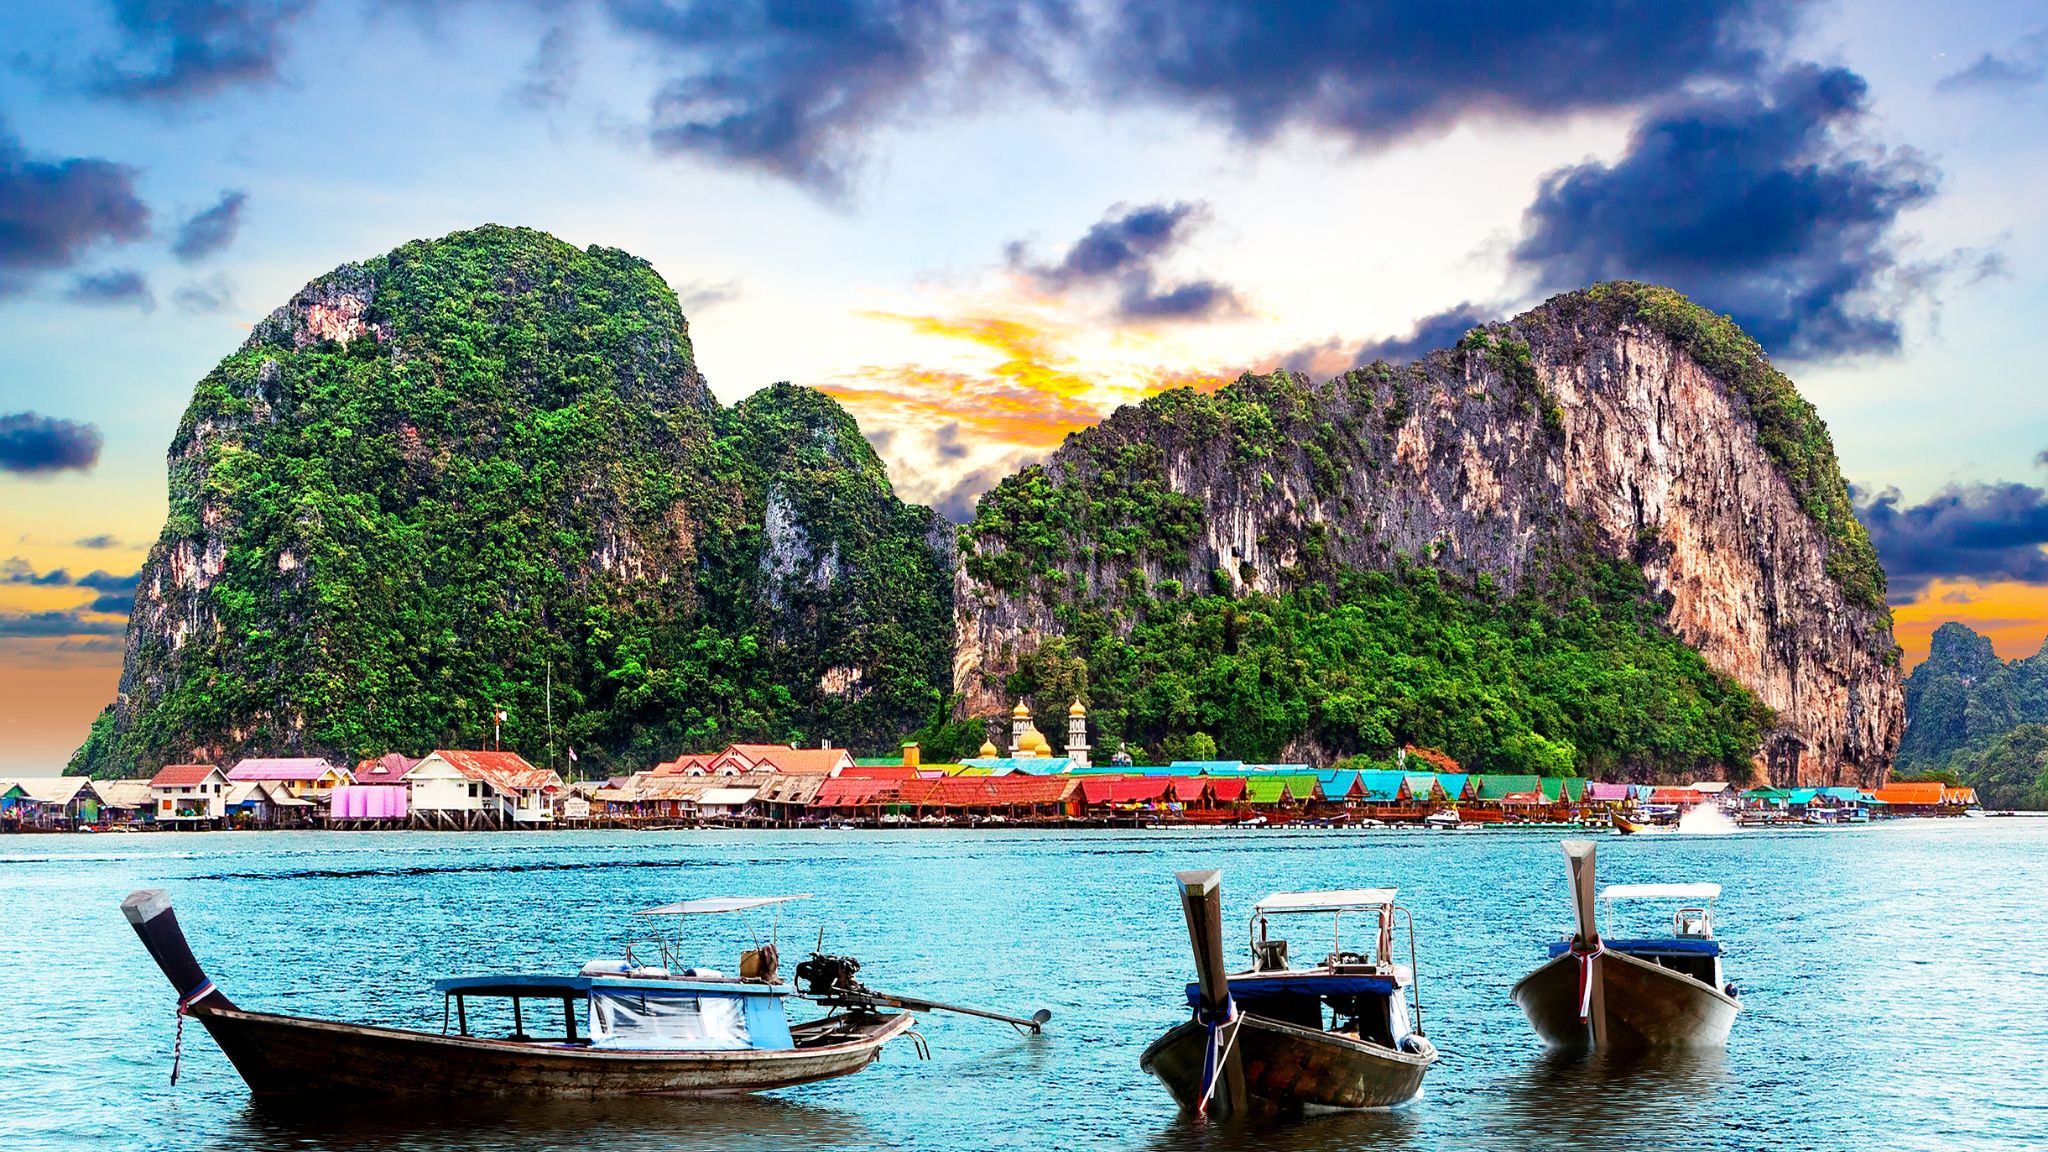 Day 1 Phuket The Charming Island With Natural Beauty And Vibrant Culture